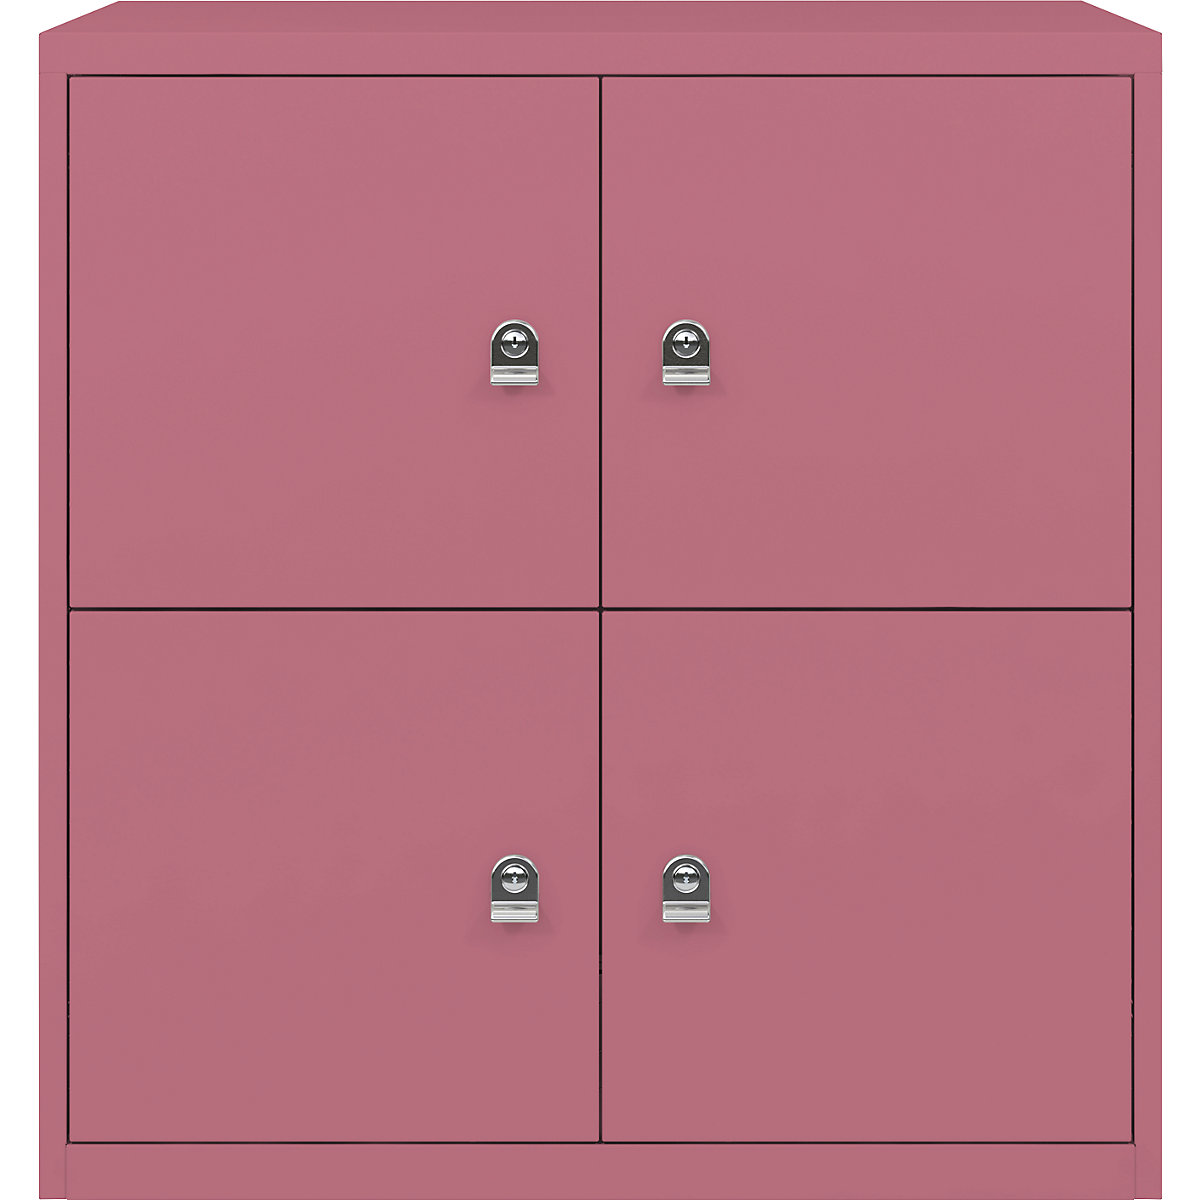 LateralFile™ lodge – BISLEY, with 4 lockable compartments, height 375 mm each, pink